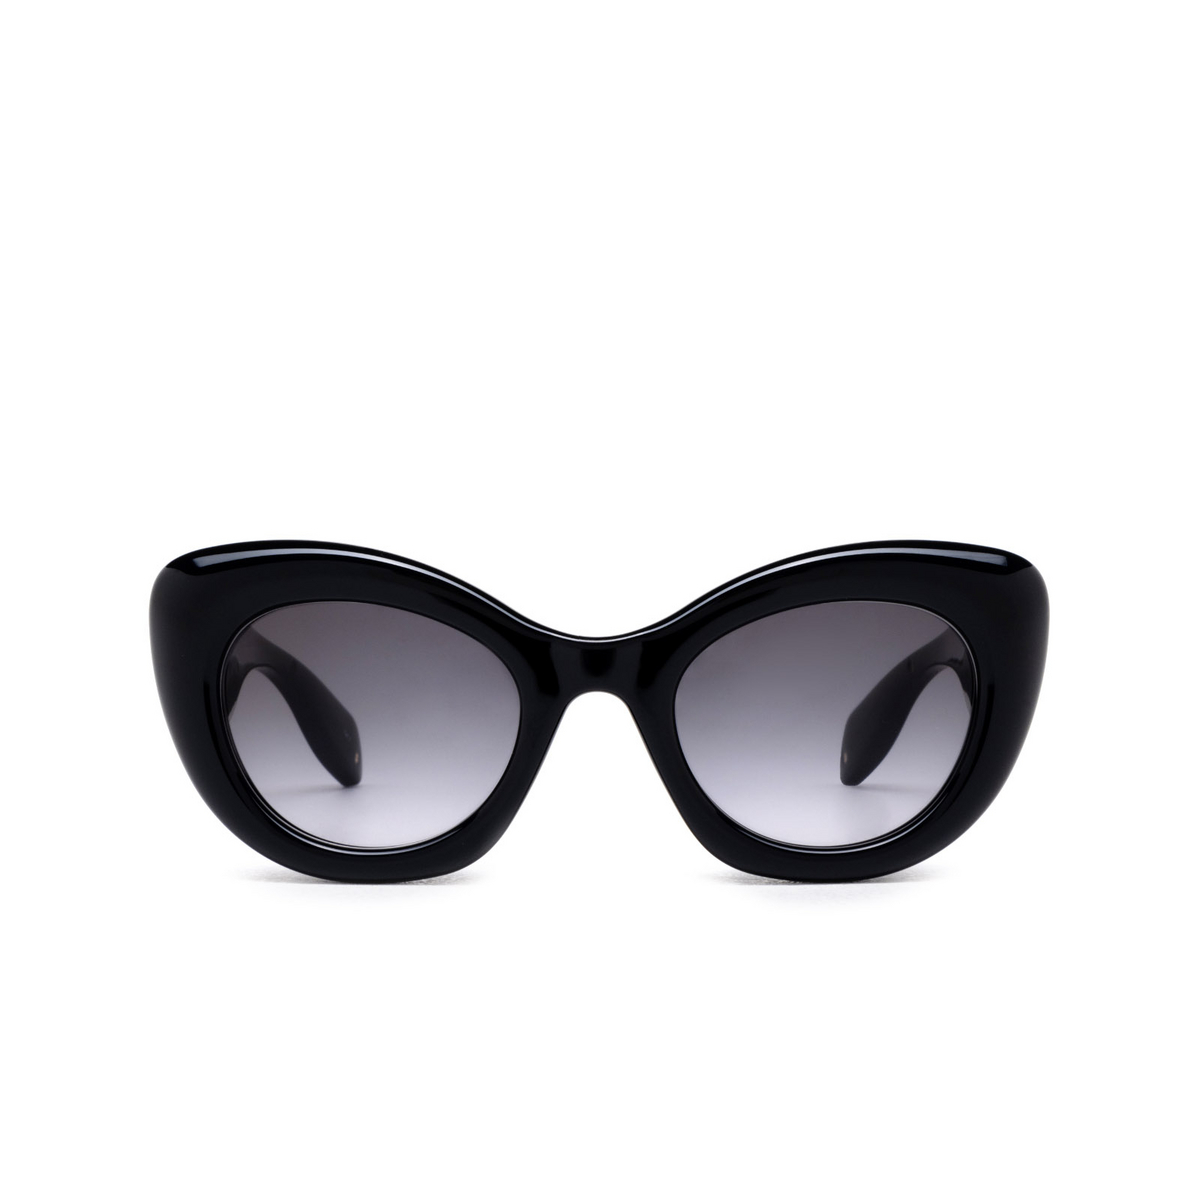 Alexander McQueen The Curve Cat-eye Sunglasses 001 Black - front view